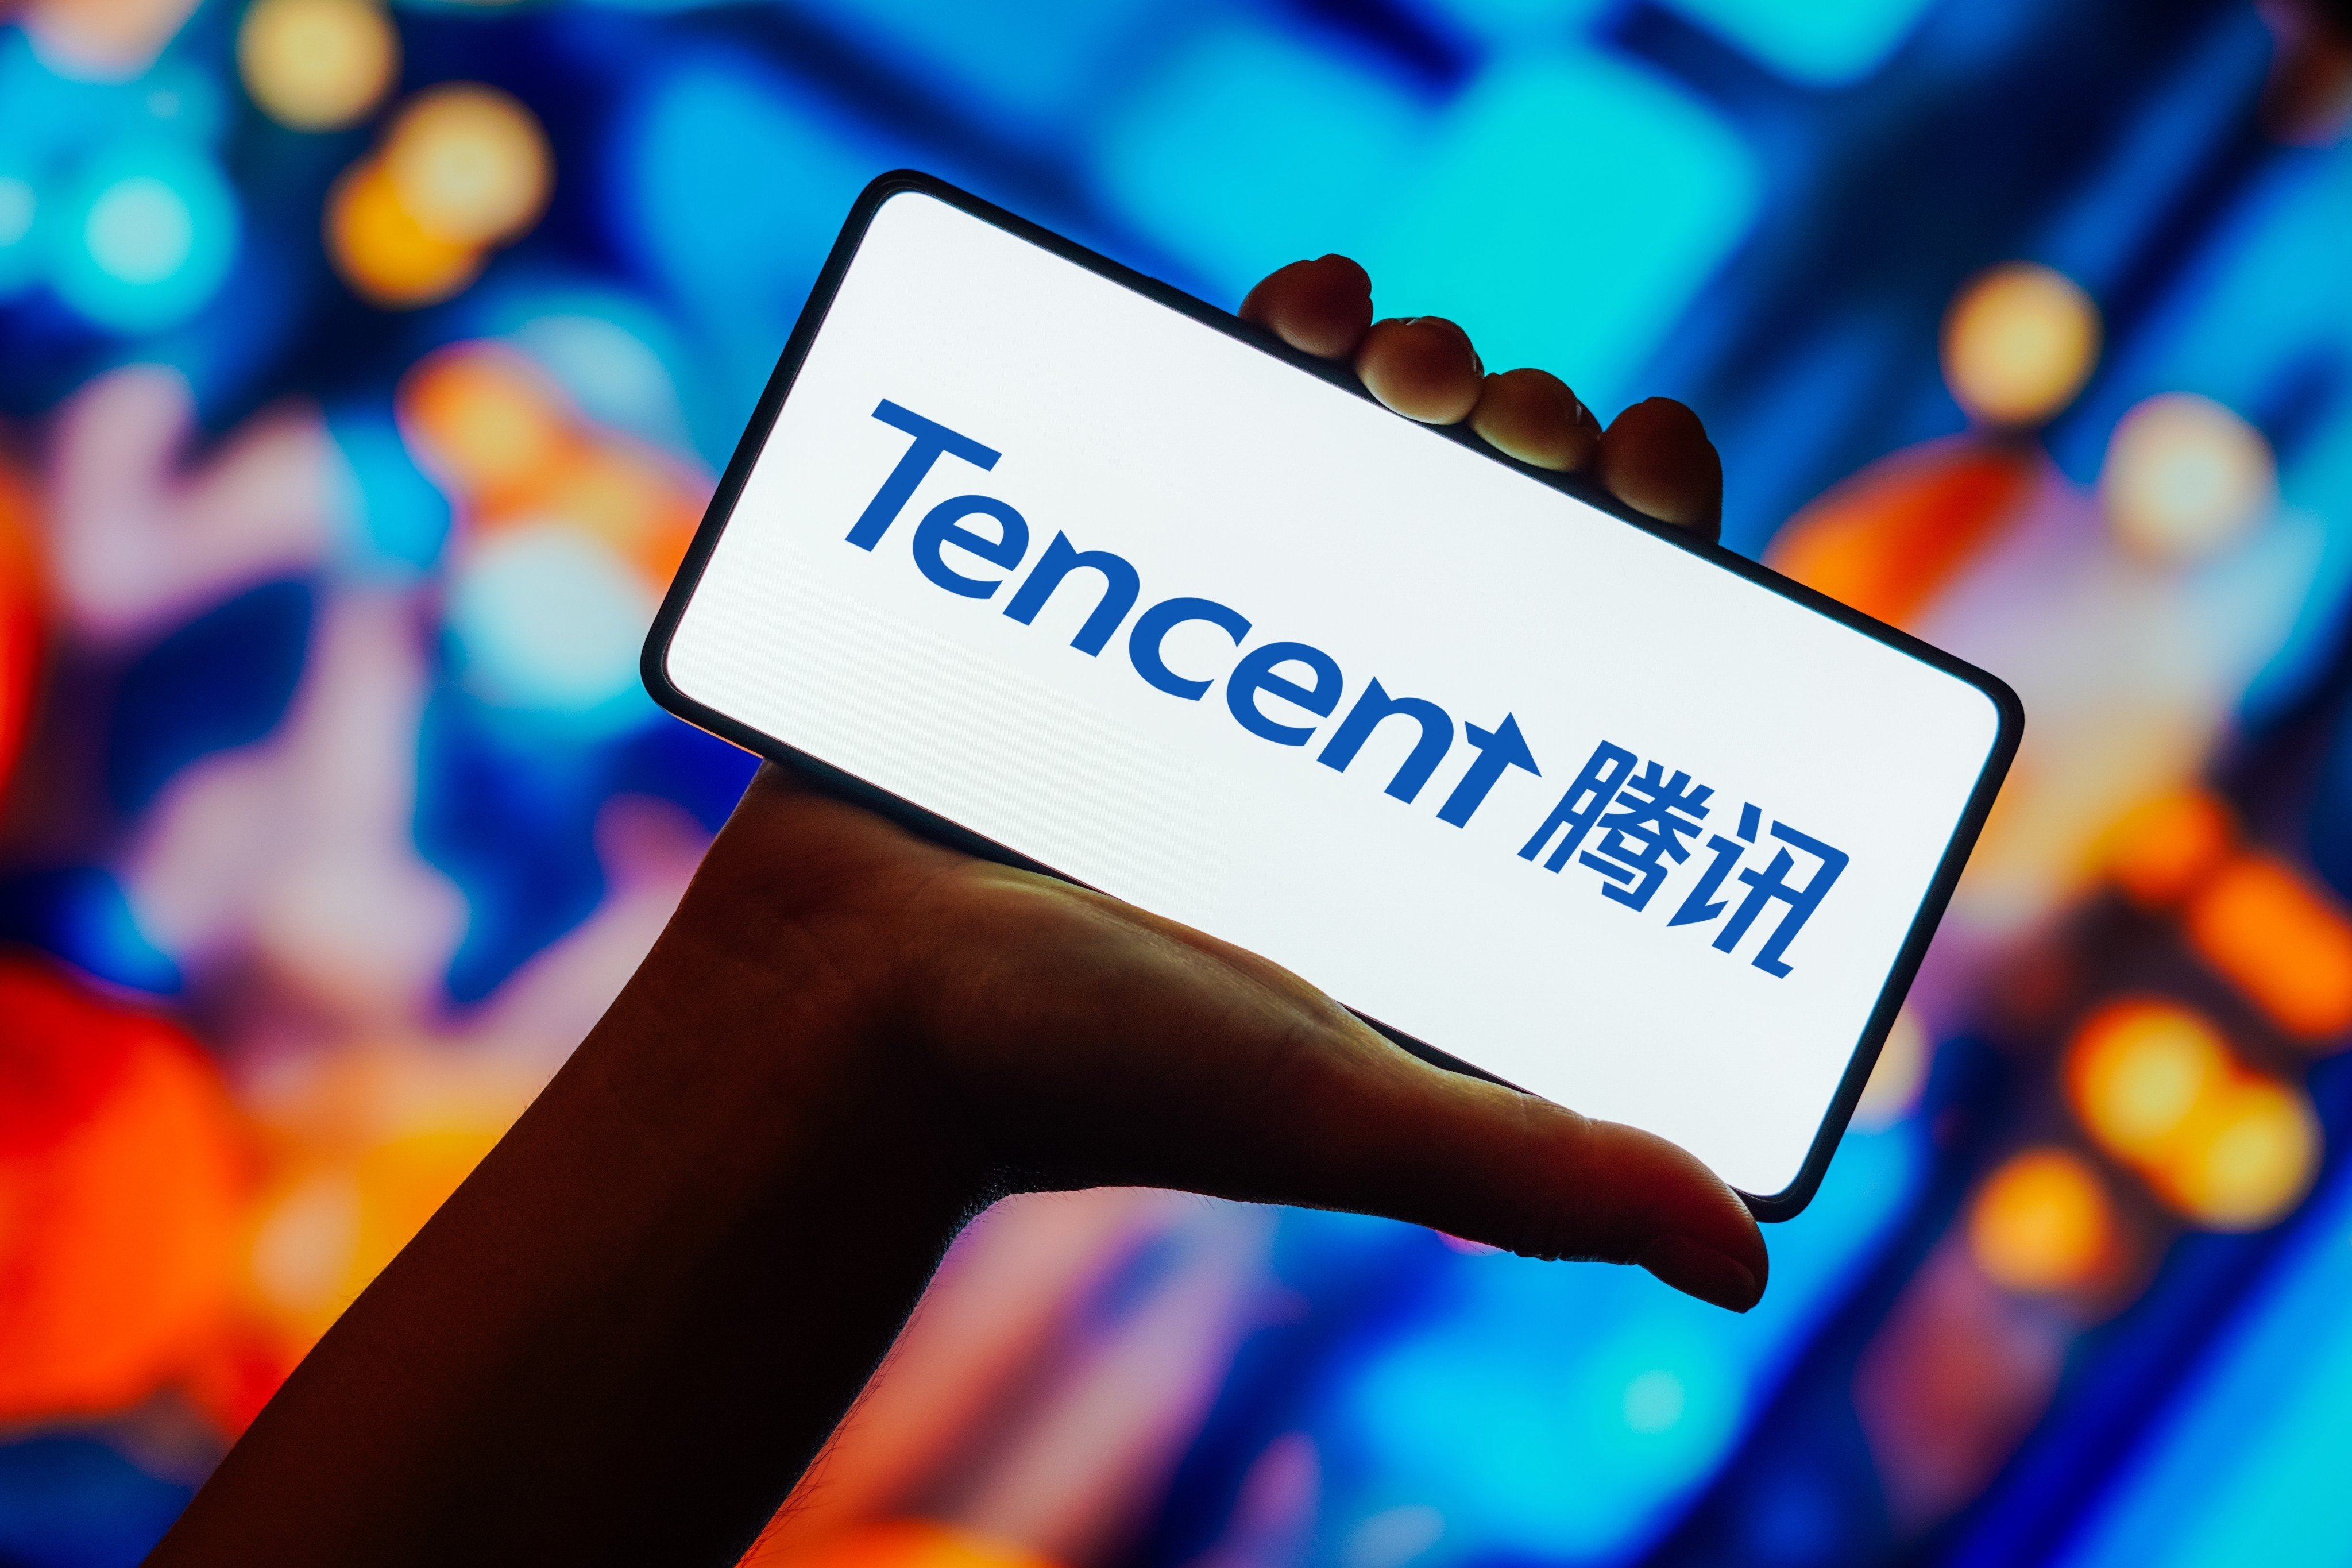 Tencent has been finding ways to improve the training efficiency of its artificial intelligence models without upgrading to the most advanced chips. Photo: Shutterstock